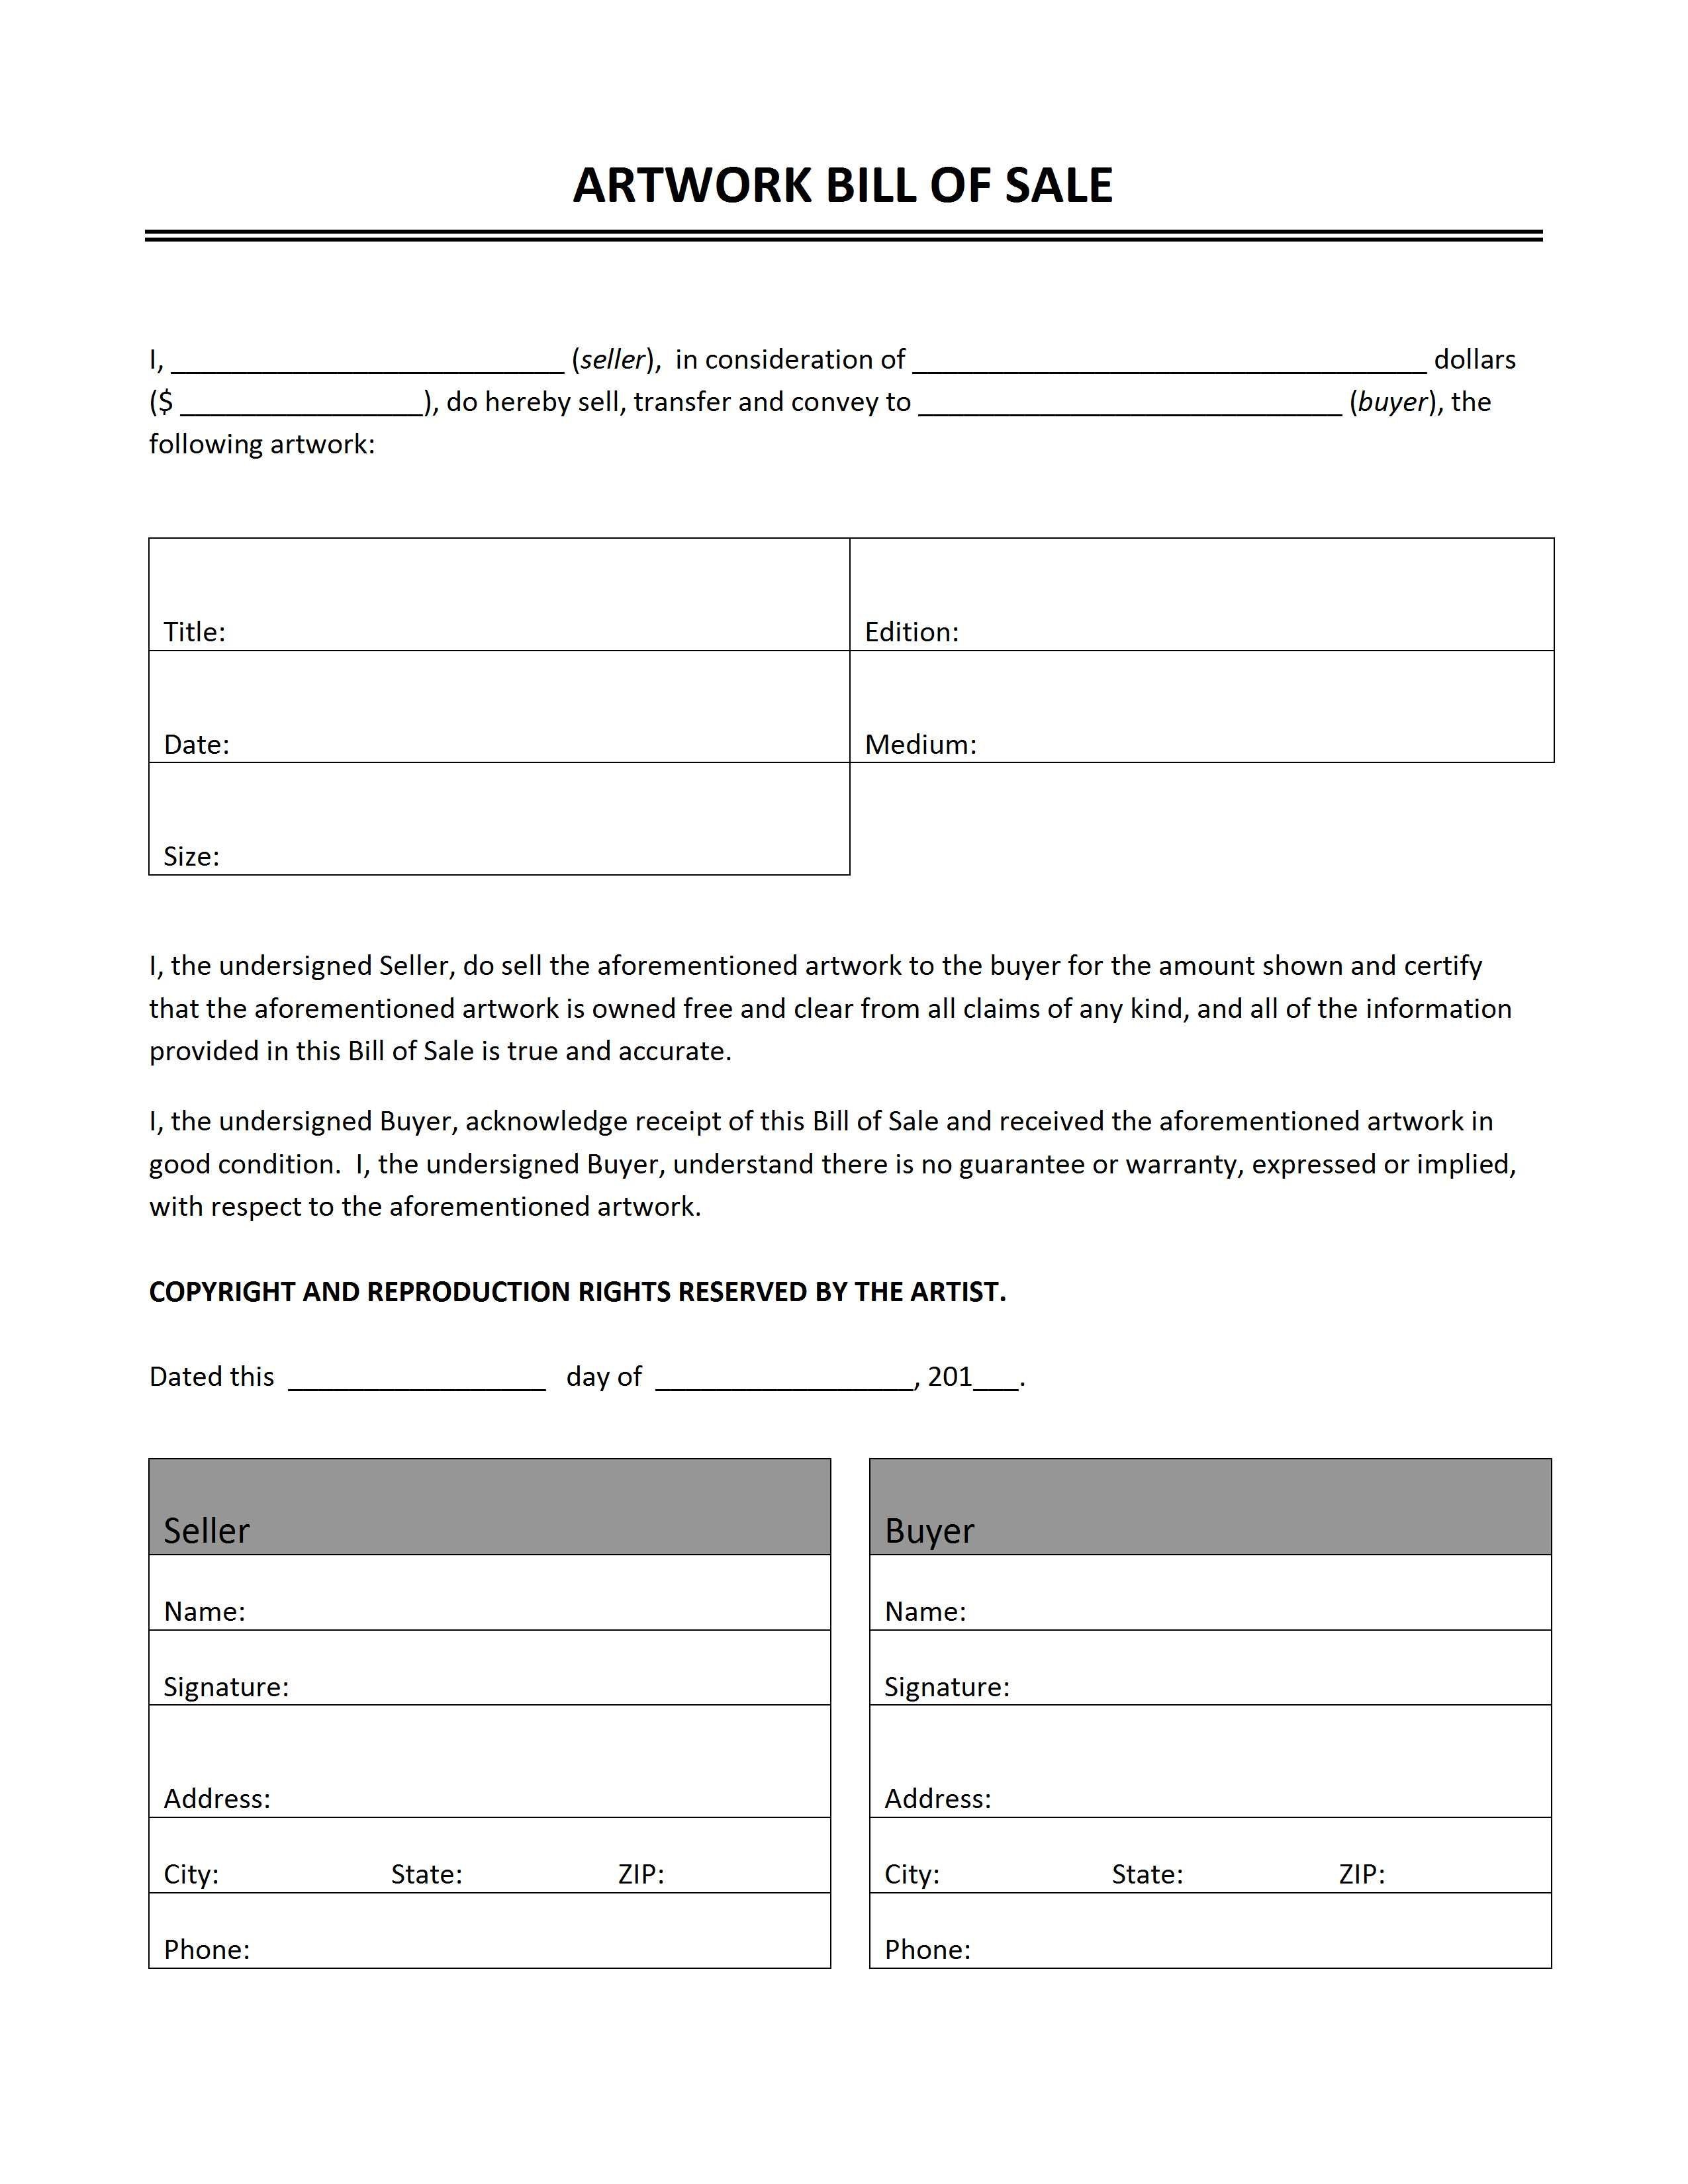 This Is An Artwork Bill Of Sale Template That Can Be Used As A - Free Printable Bill Of Sale Form